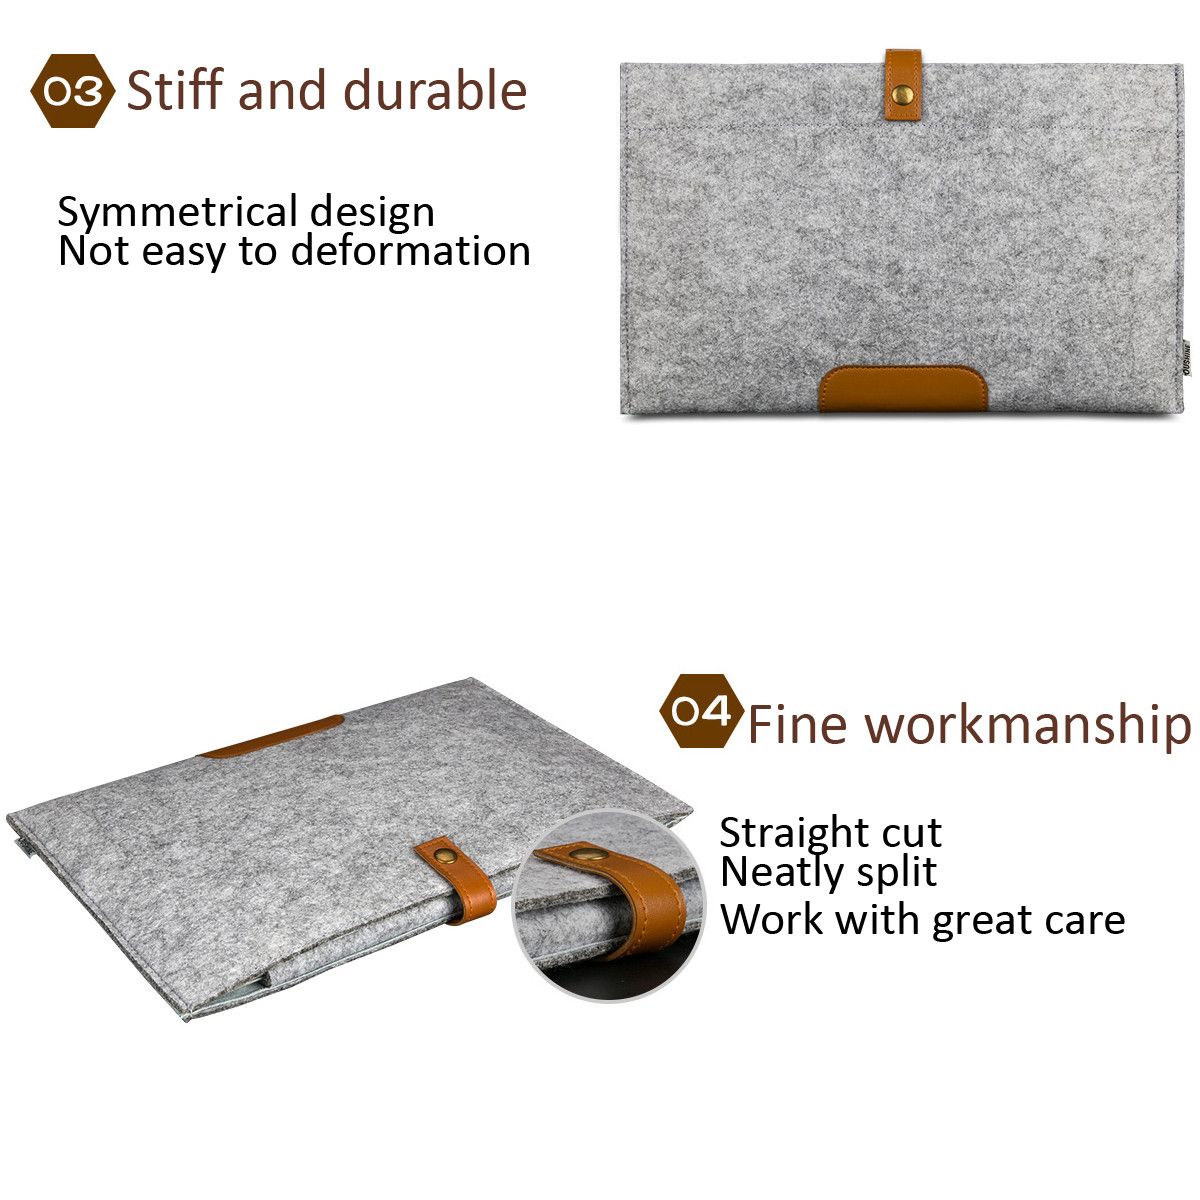 Felt-Laptop-Sleeve-Protective-Cover-Inner-Bag-Computer-Bag-for-11quot-Macbook-Apple-Notebook-1745037